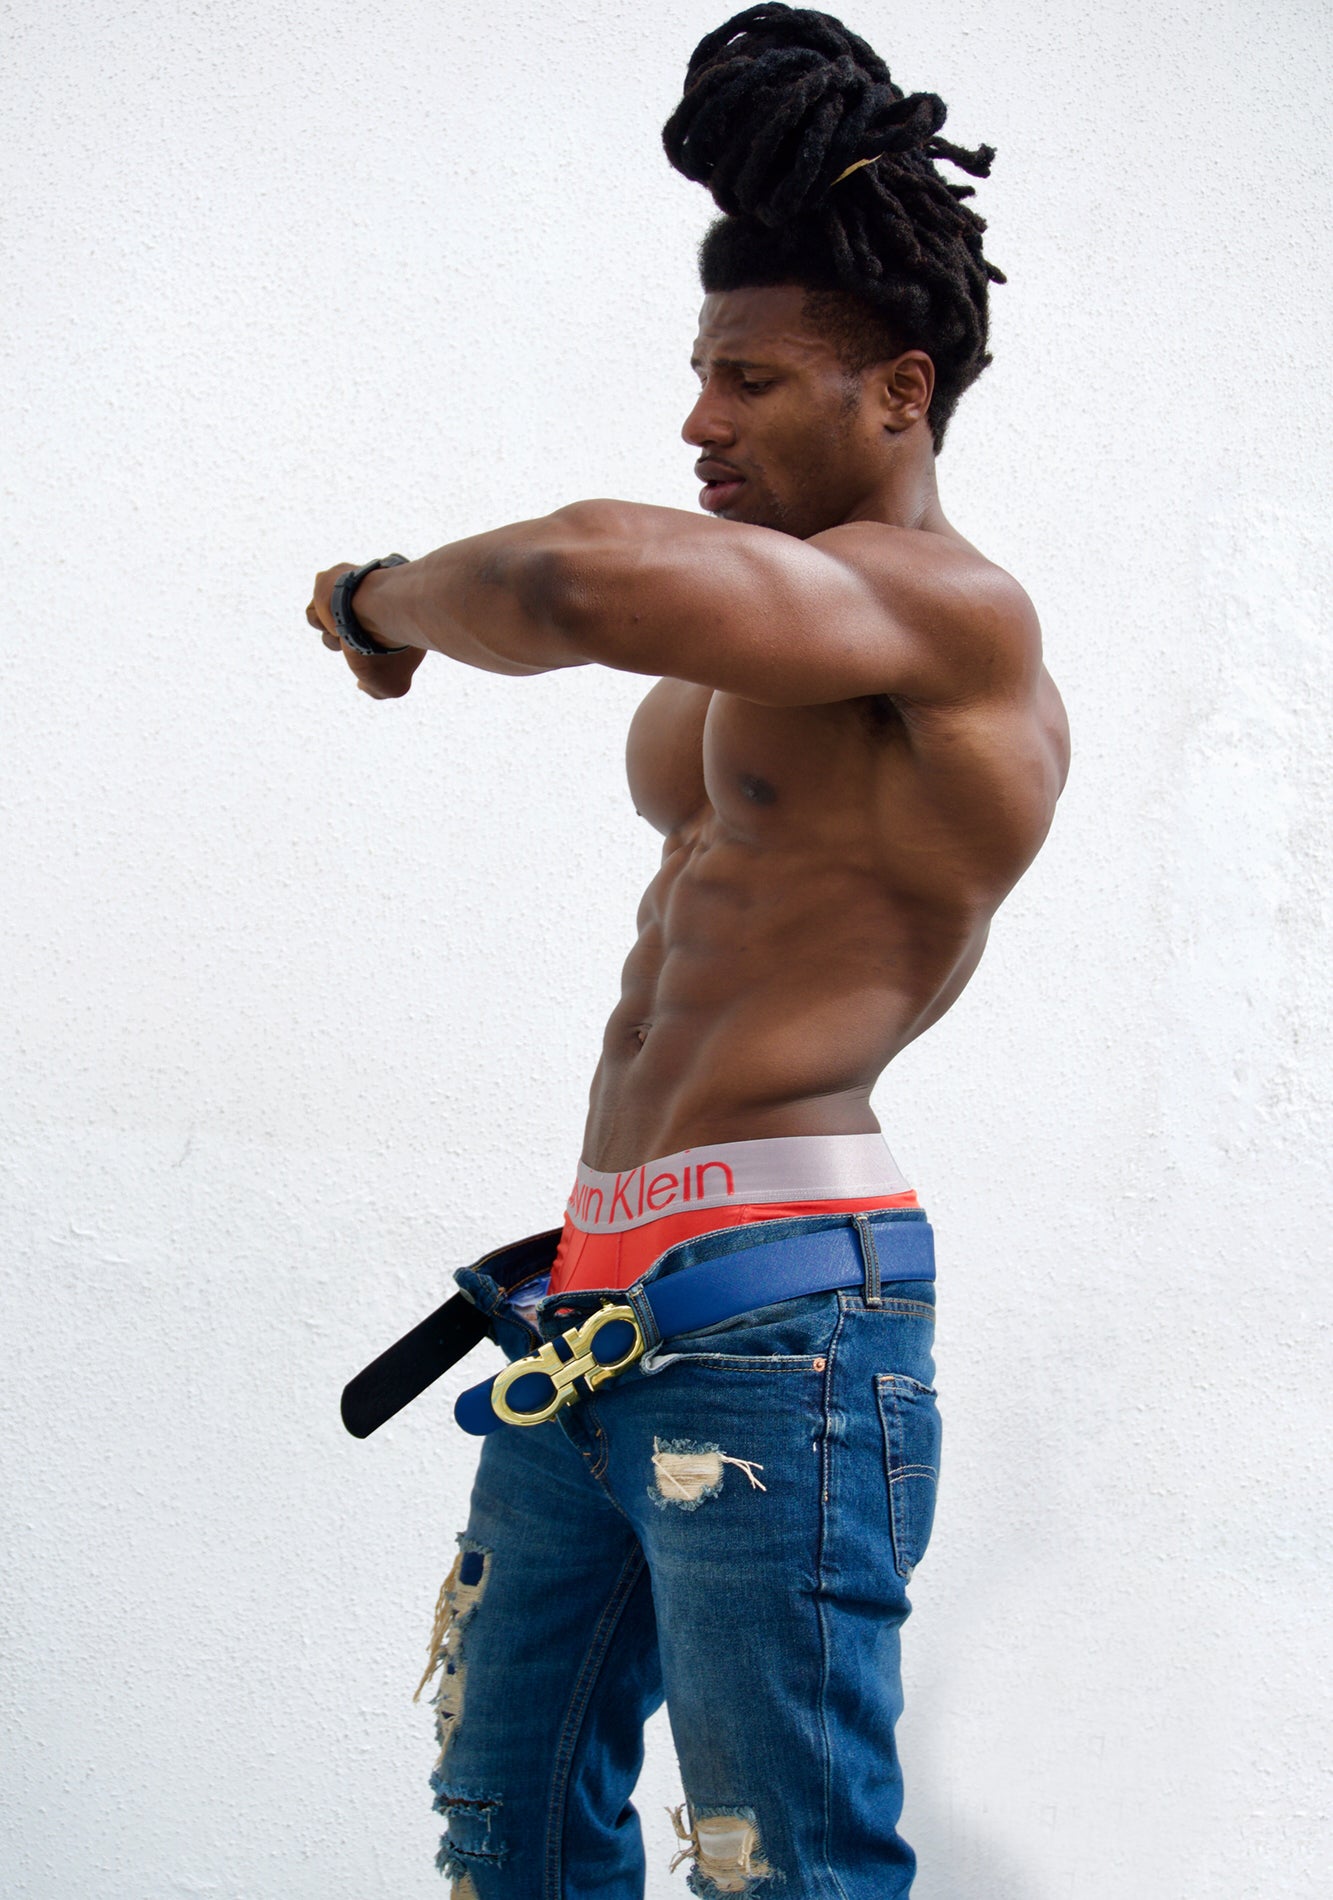 #MCM: Haitian Hunk Wentworth Michel Is What Fantasies Are Made Of
